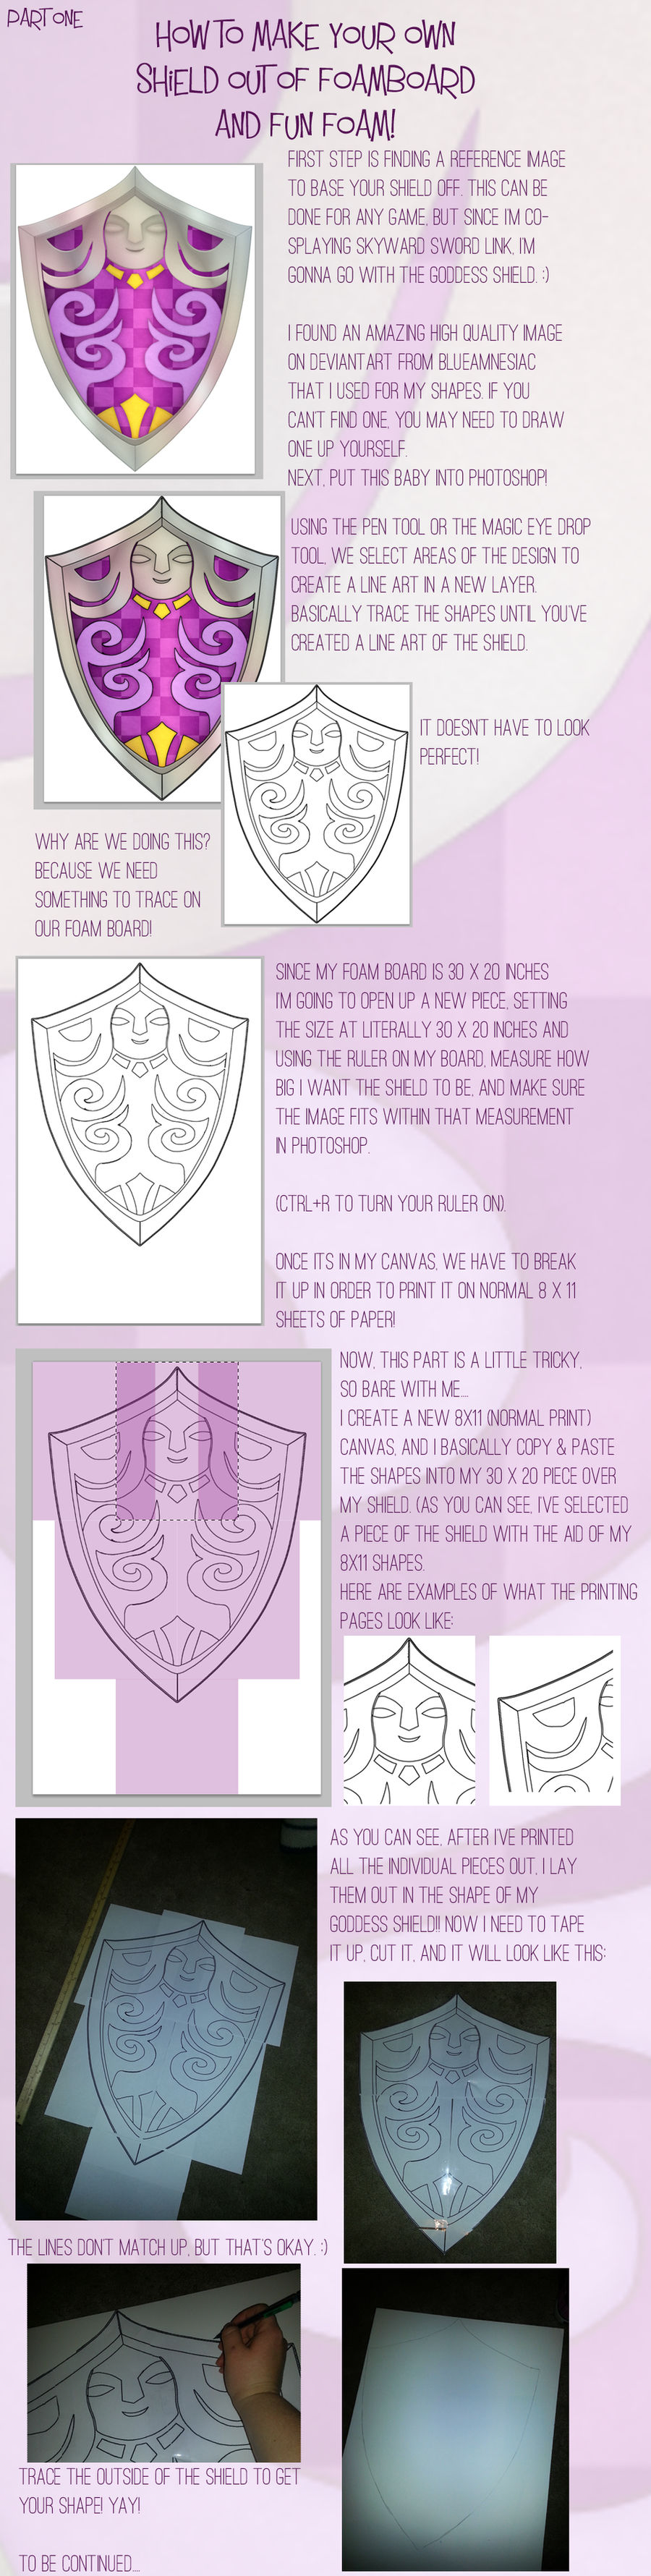 How to make your own shield - Part 1